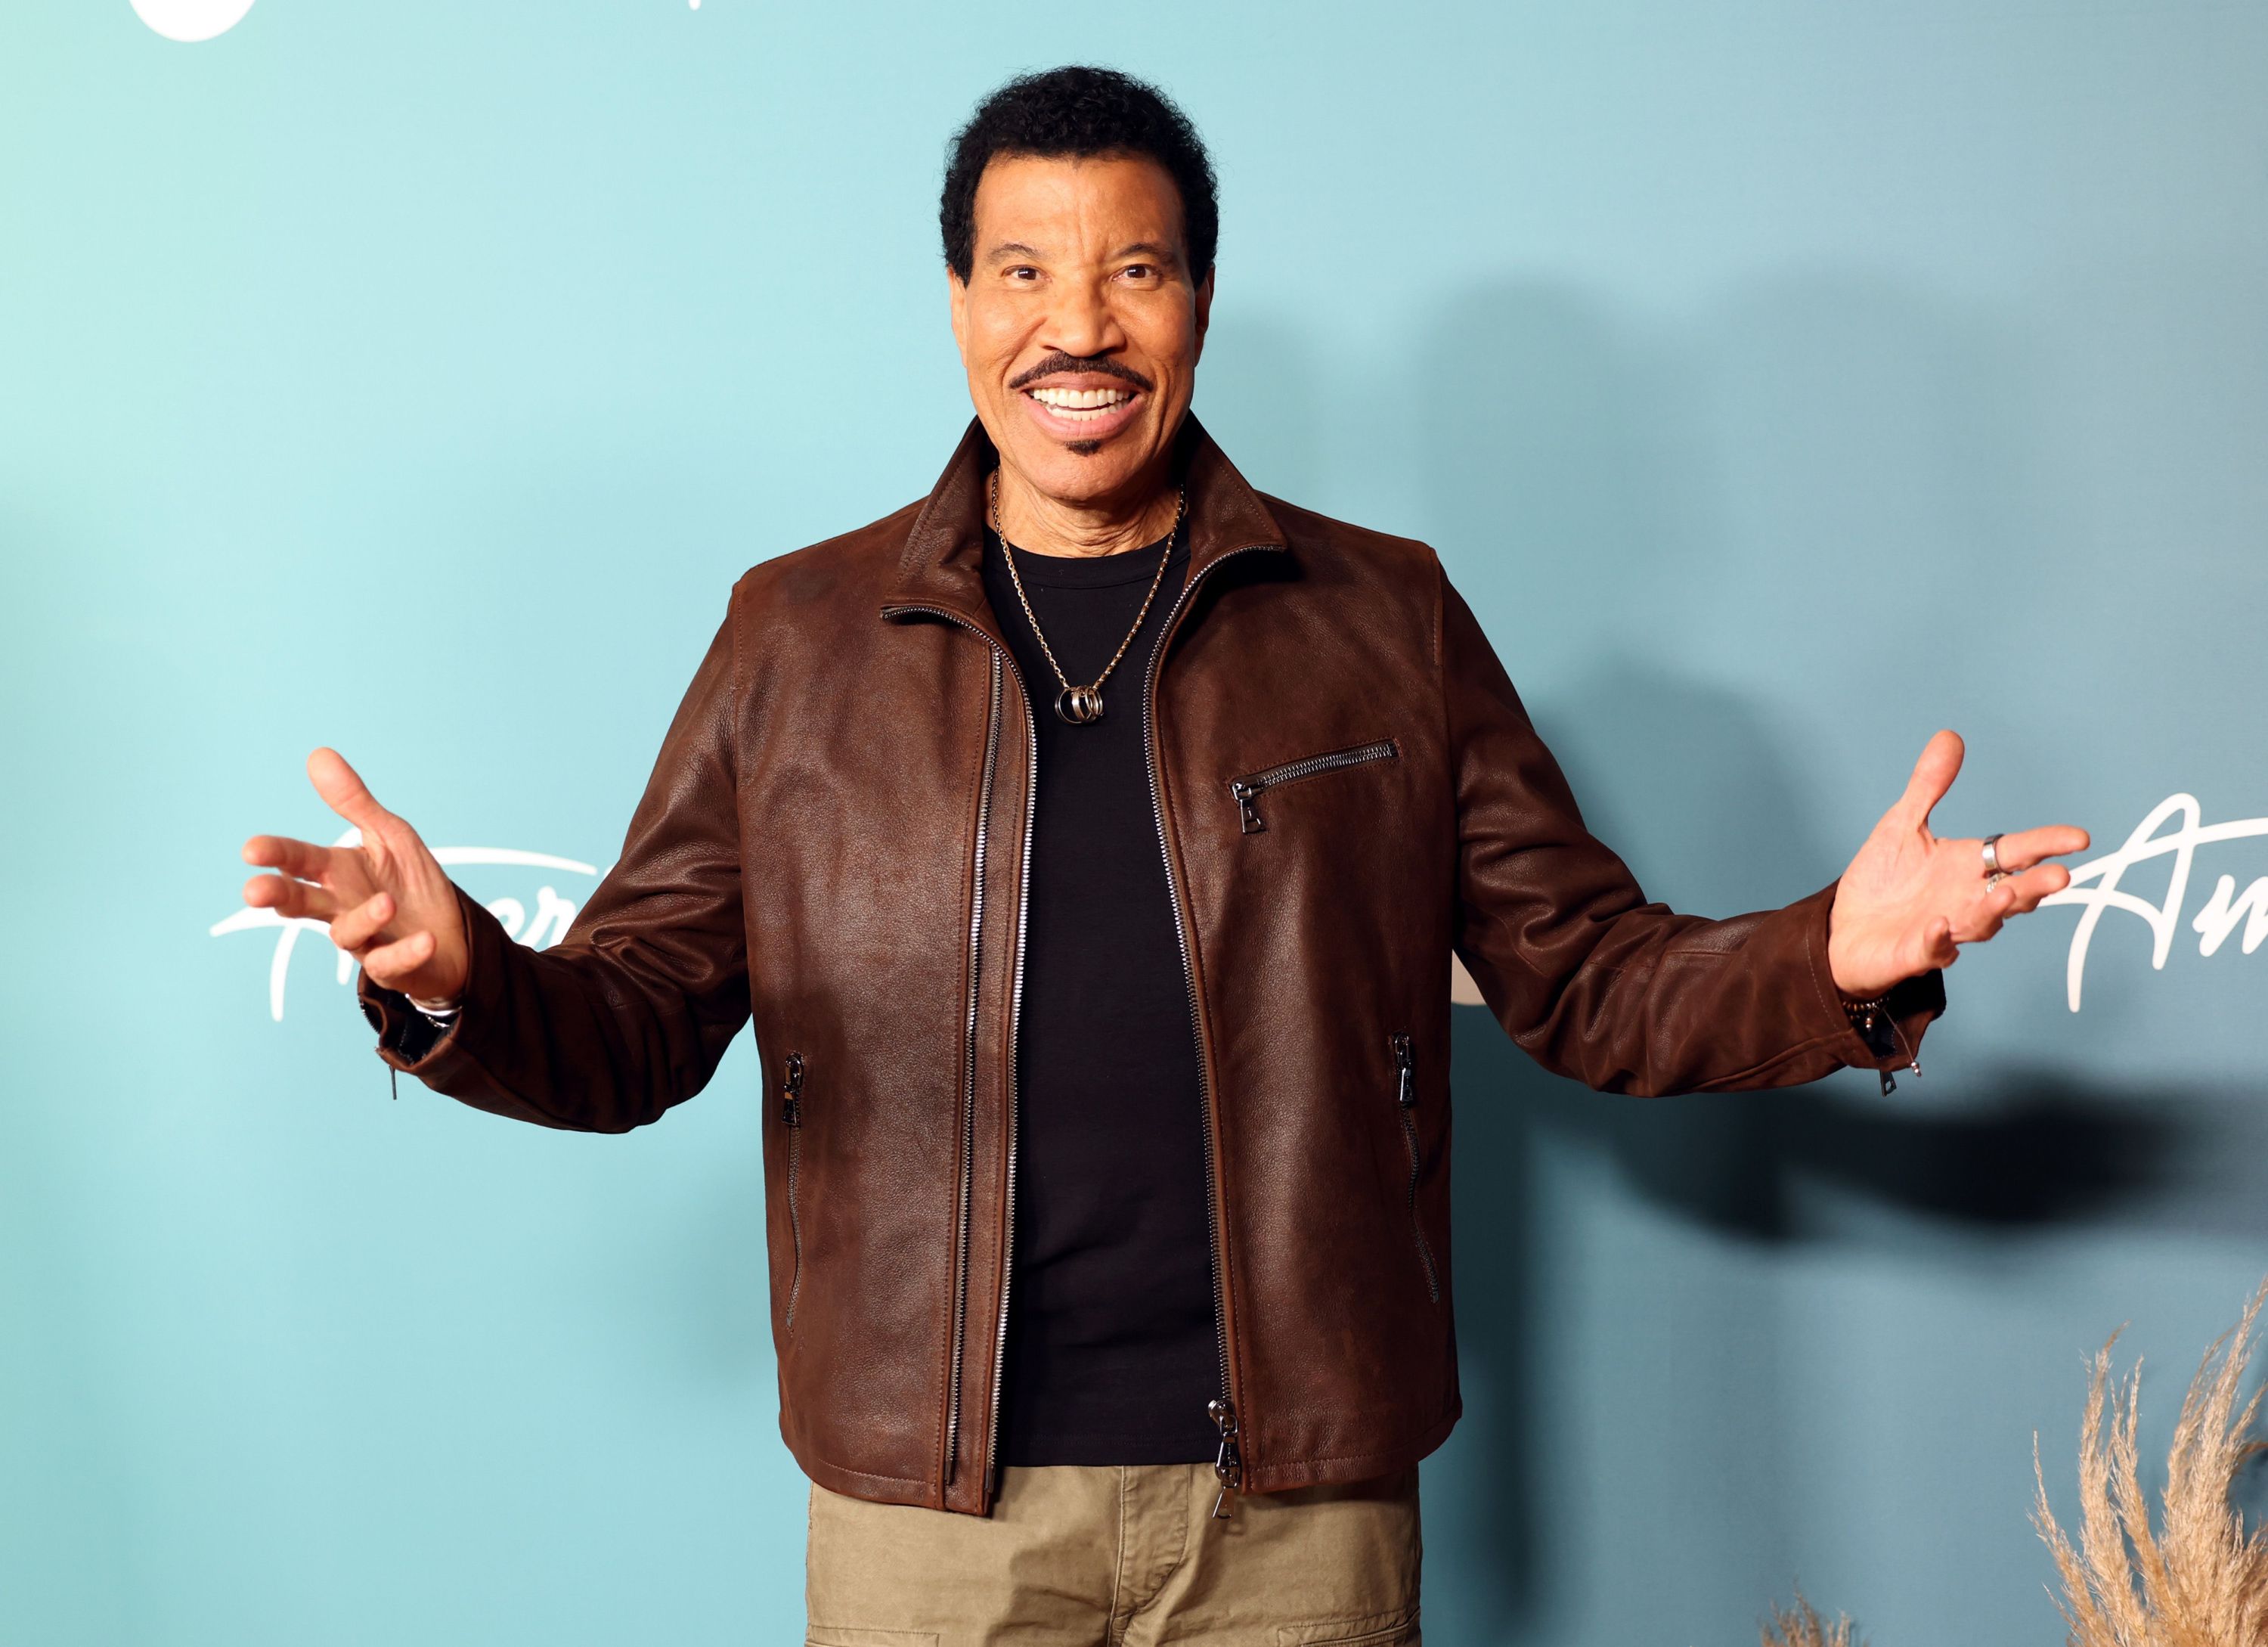 Lionel Richie attends the 'American Idol' Season 22 Top 10 Event in Los Angeles.